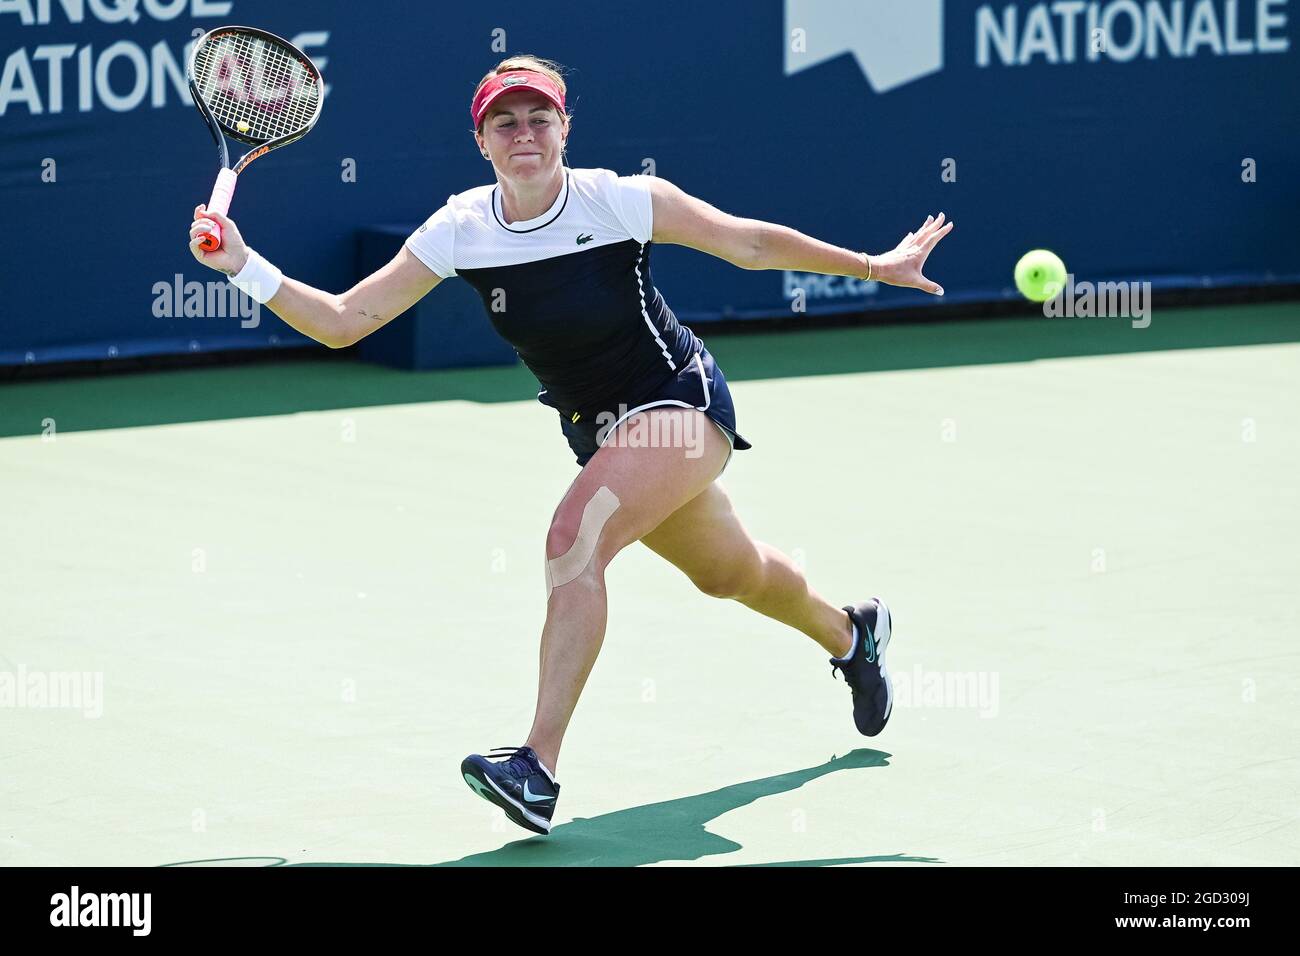 Montreal, Canada. August 10, 2021: Anastasia Pavlyuchenkova (RUS) returns the ball during the WTA National Bank Open first round match at IGA Stadium in Montreal, Quebec. David Kirouac/CSM Credit: Cal Sport Media/Alamy Live News Stock Photo